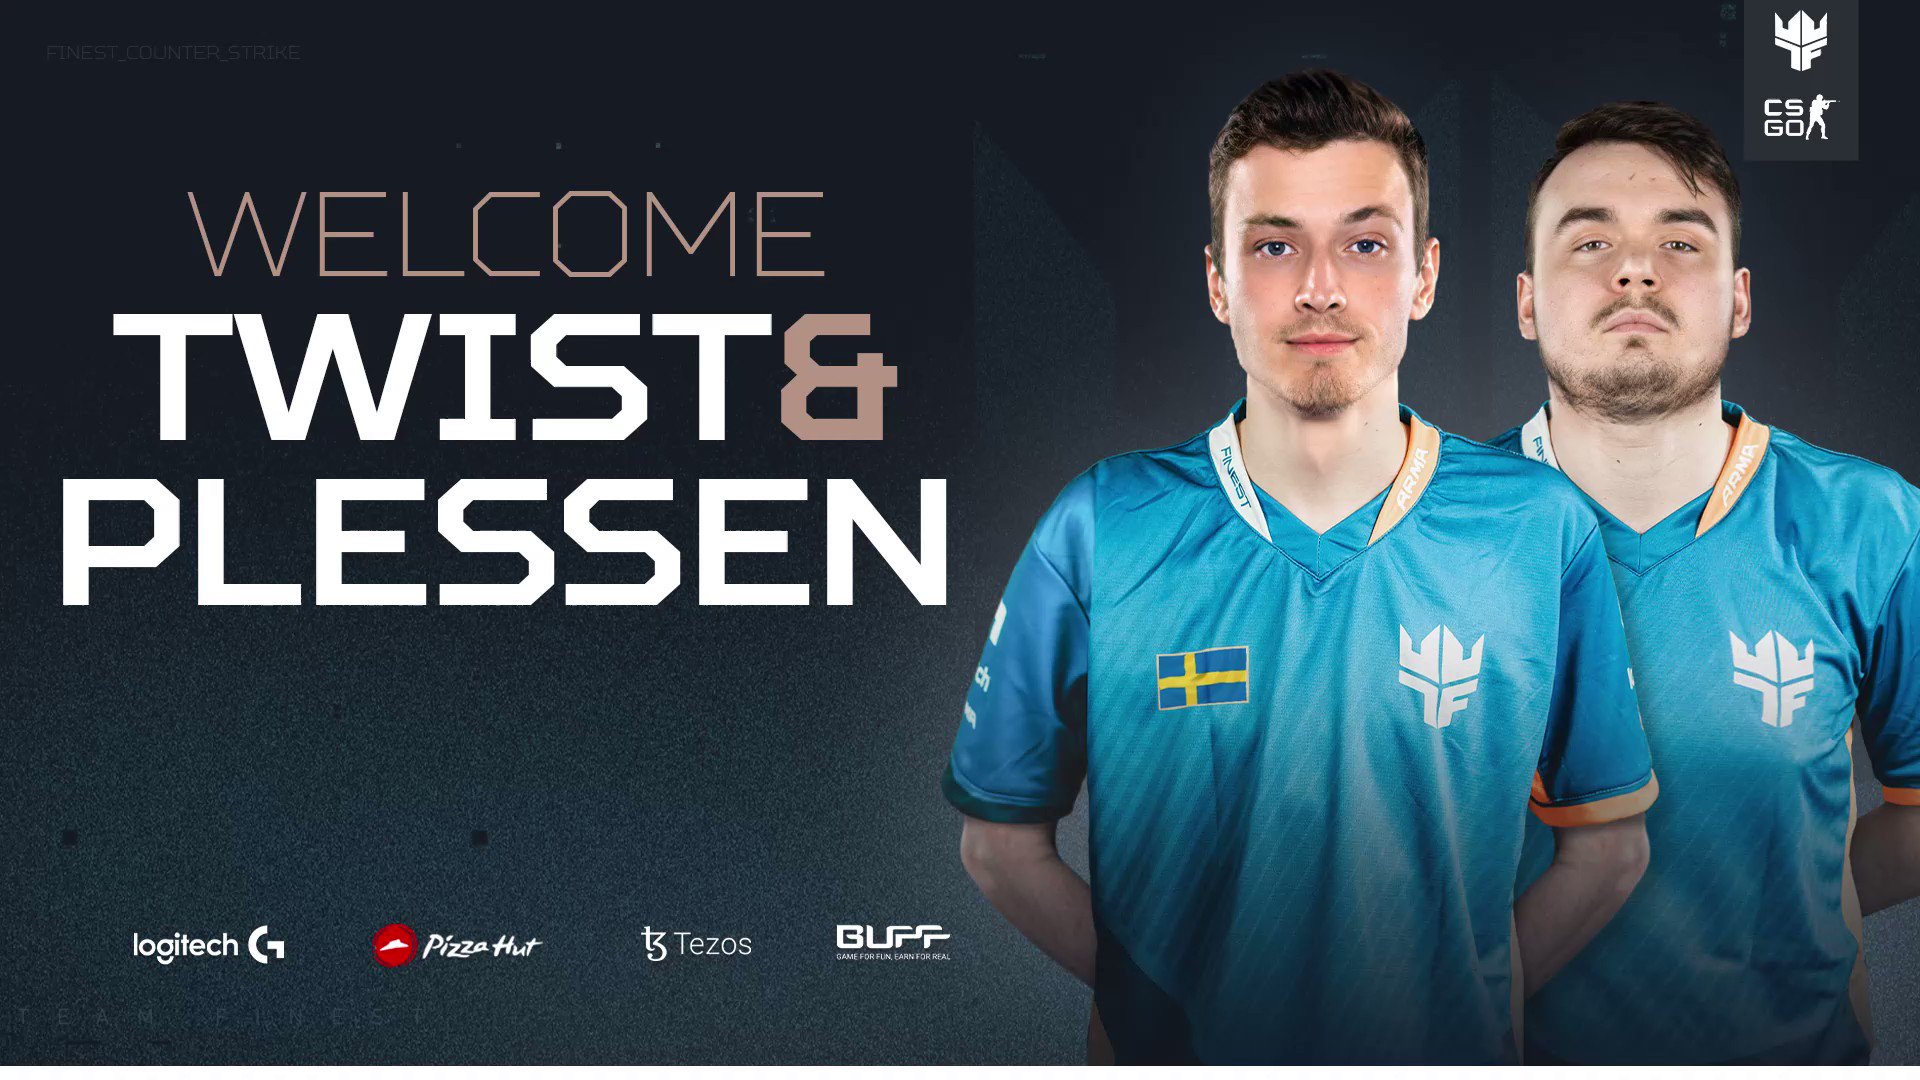 “Finest” Gets An Upgrade By Signing “Twist” And “PlesseN”